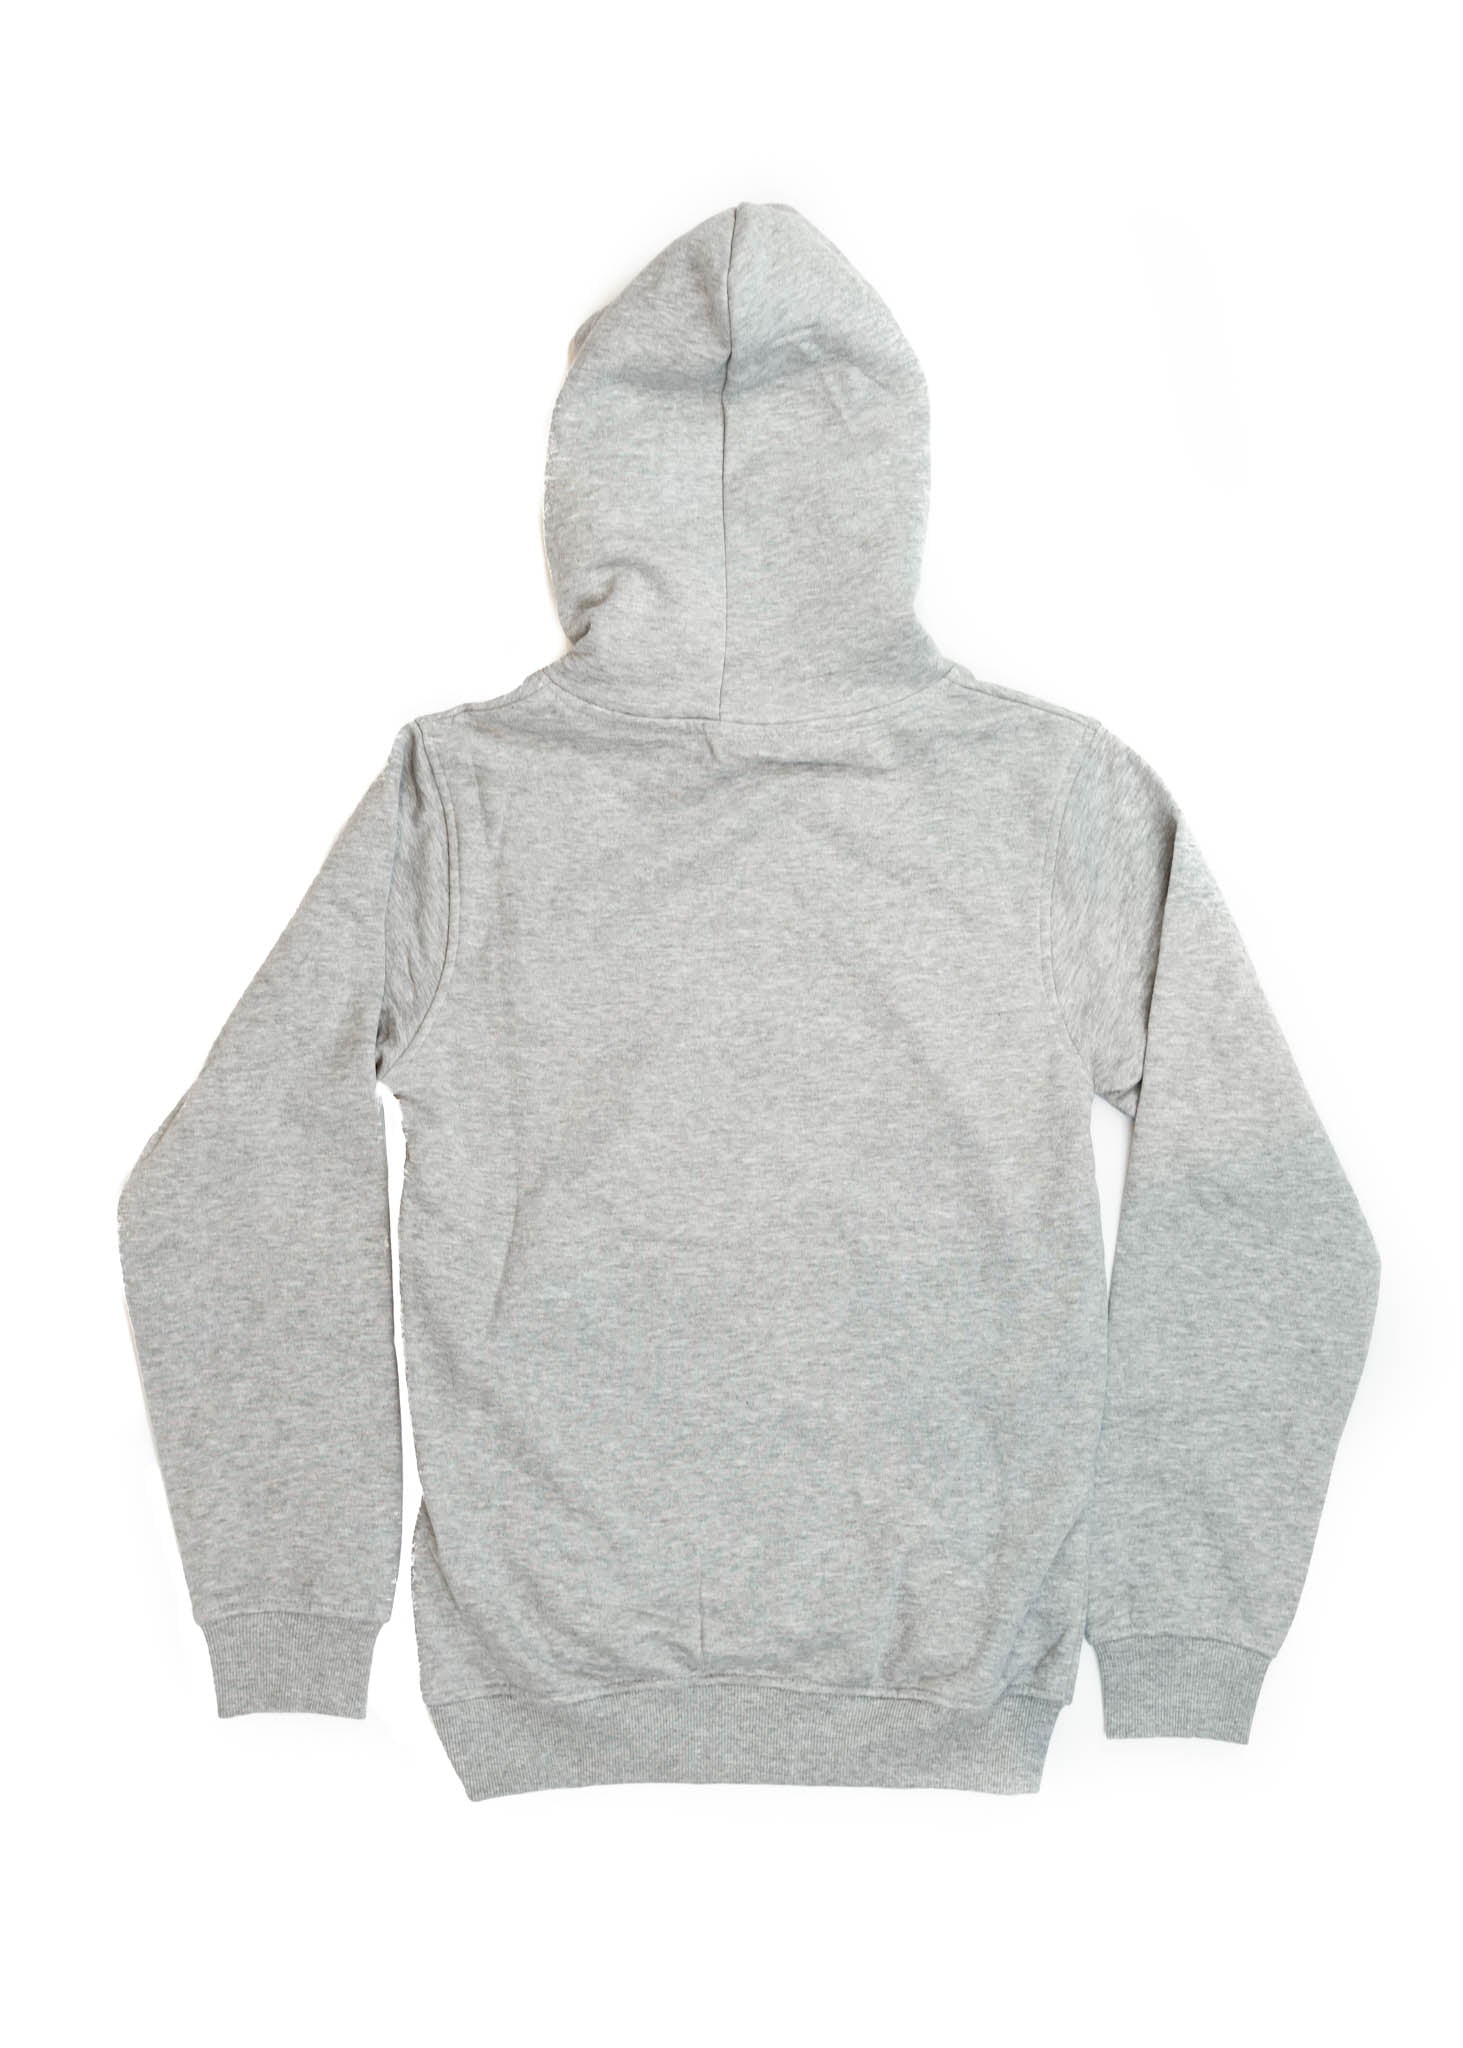 A grey Mercedes-Benz unisex hoodie for men and women. Photo is a back view of the sweater with an embroidered Mercedes-Benz W201 190E 2.5-16 Evo II. Fabric composition is cotton, polyester, and rayon. The material is very soft, stretchy, and non-transparent. The style of this hoodie is long sleeve, crewneck with a hood, hooded, with embroidery on the left chest.